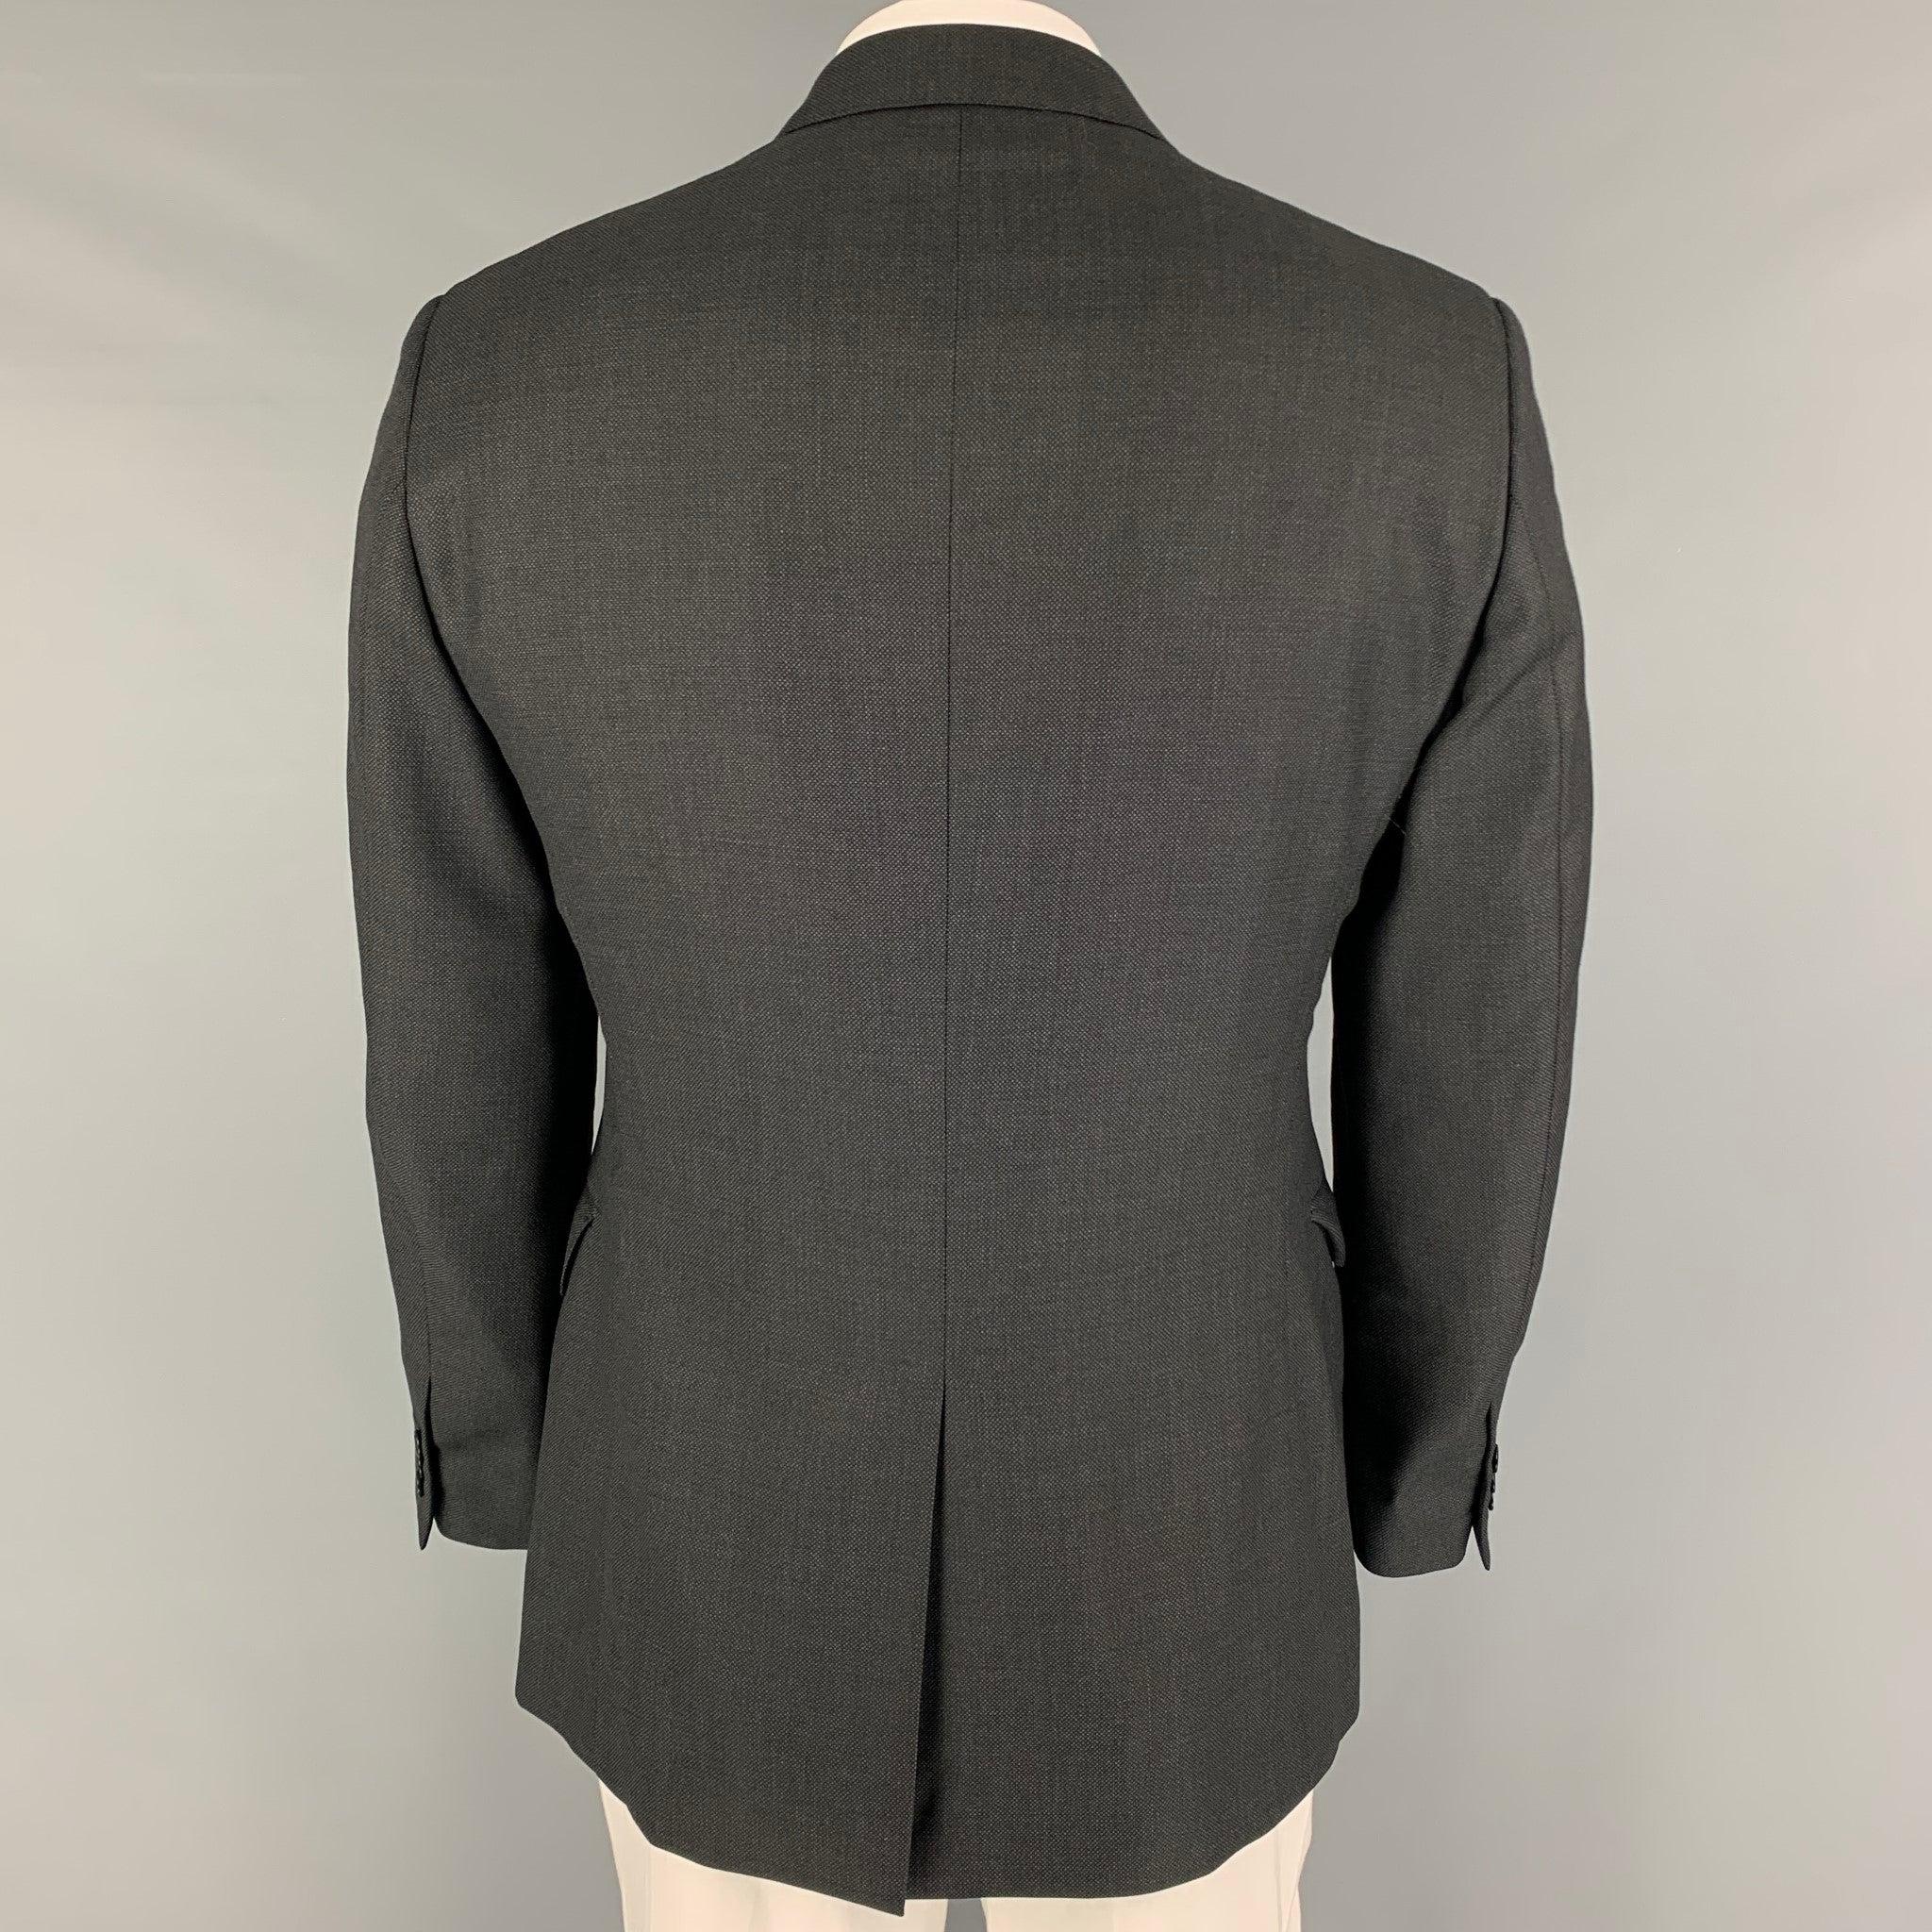 JOHN VARVATOS Size 42 Charcoal Wool Peak Lapel Sport Coat In Good Condition For Sale In San Francisco, CA